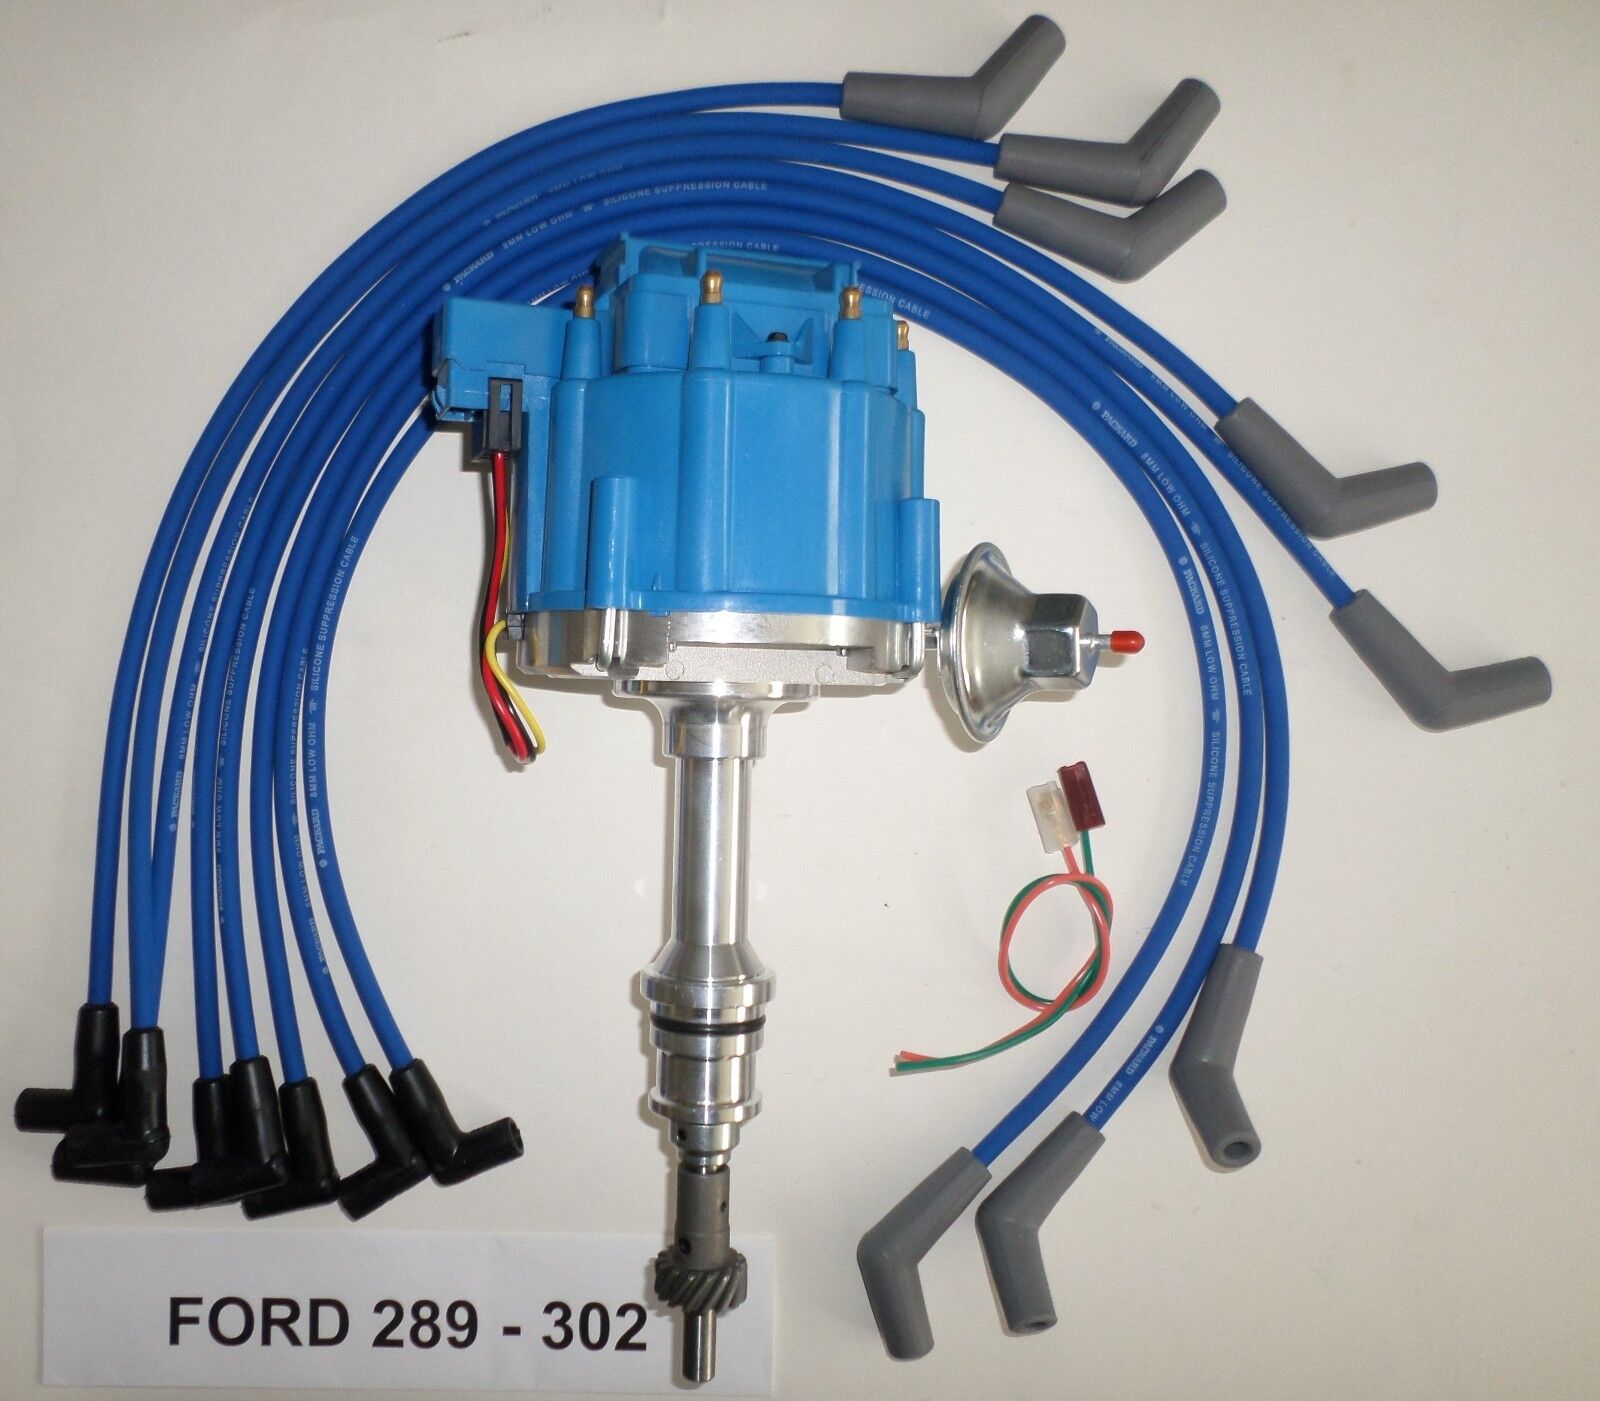 FORD Small Block 221 260 289 302 BLUE HEI Distributor + 8mm Spark Plug wires USA